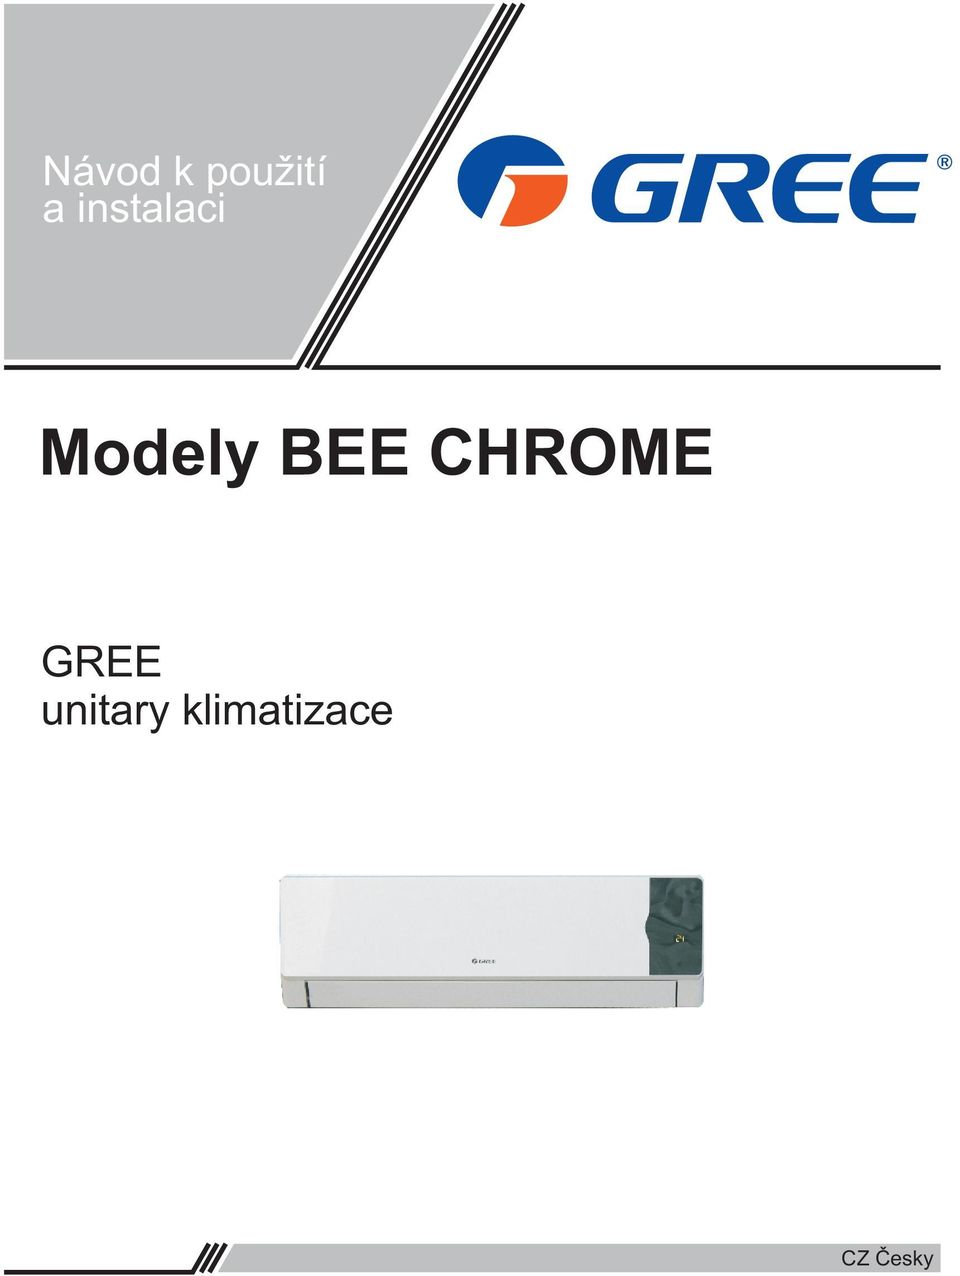 Modely BEE CHROME GREE